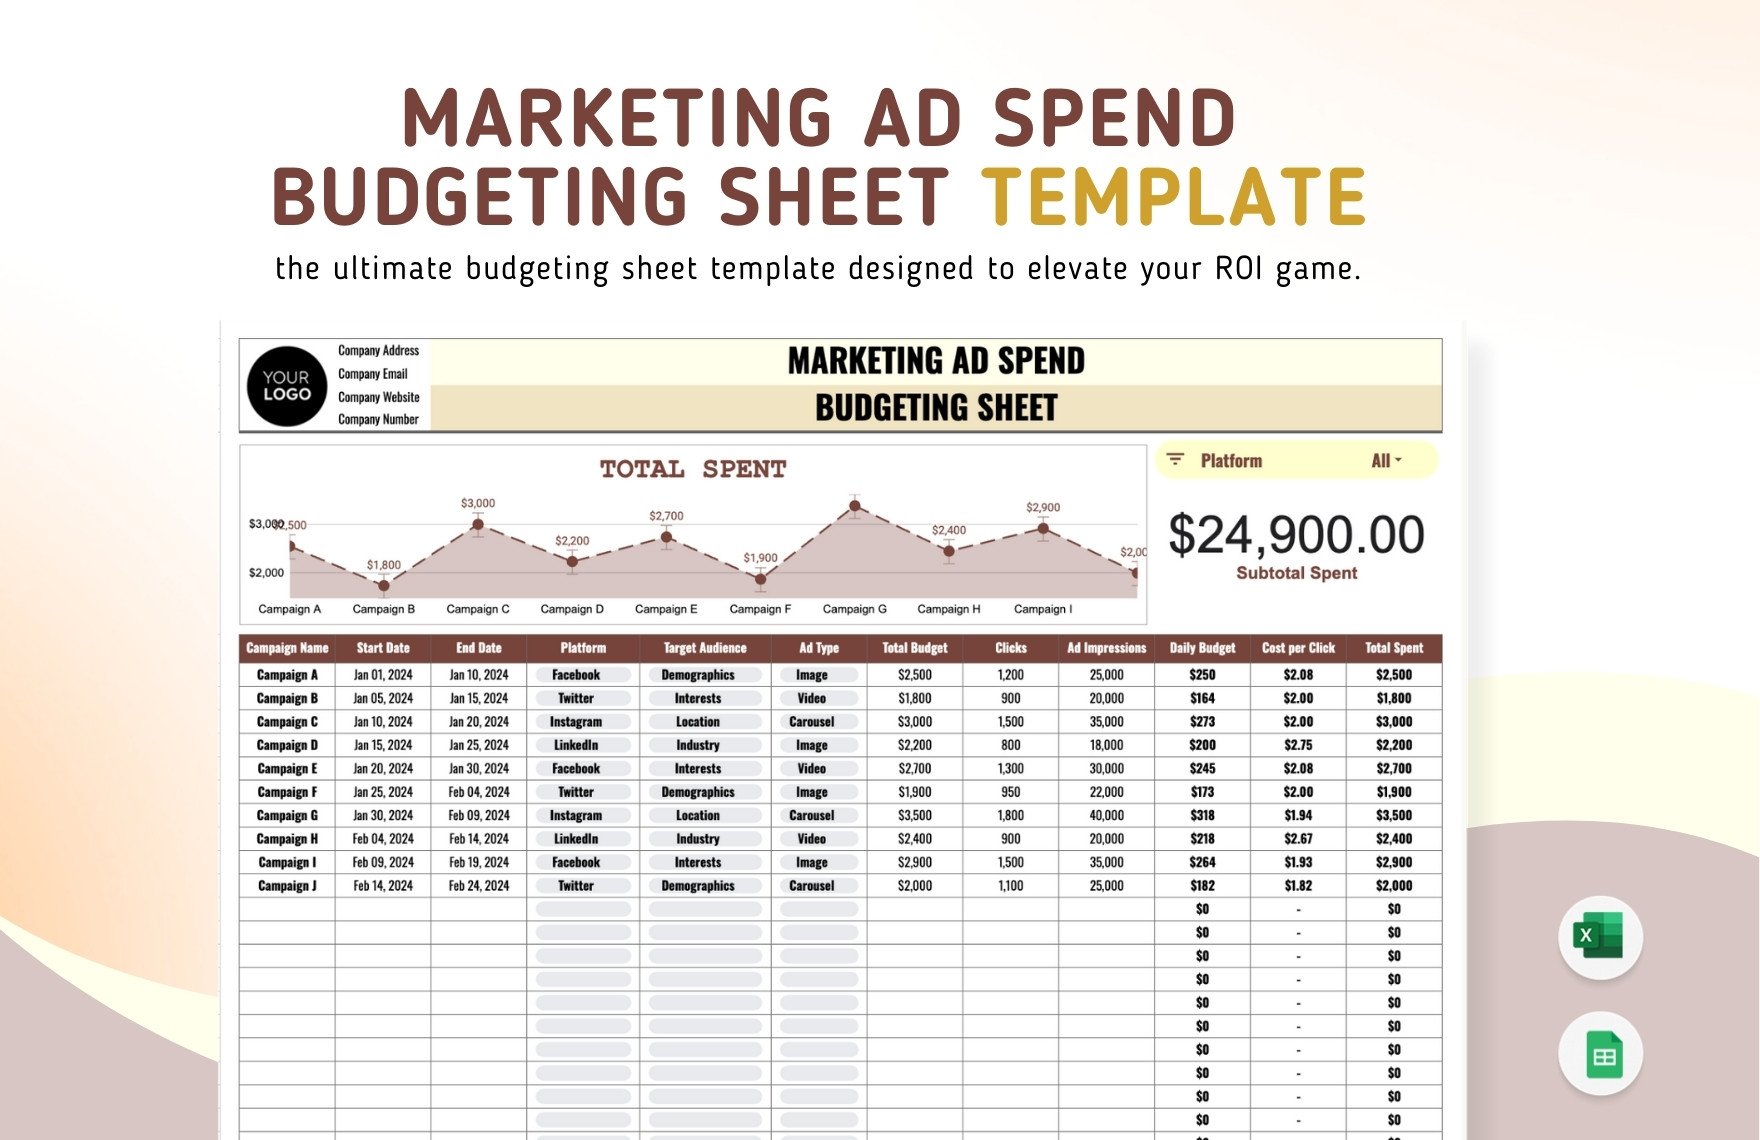 Marketing Ad Spend Budgeting Sheet Template